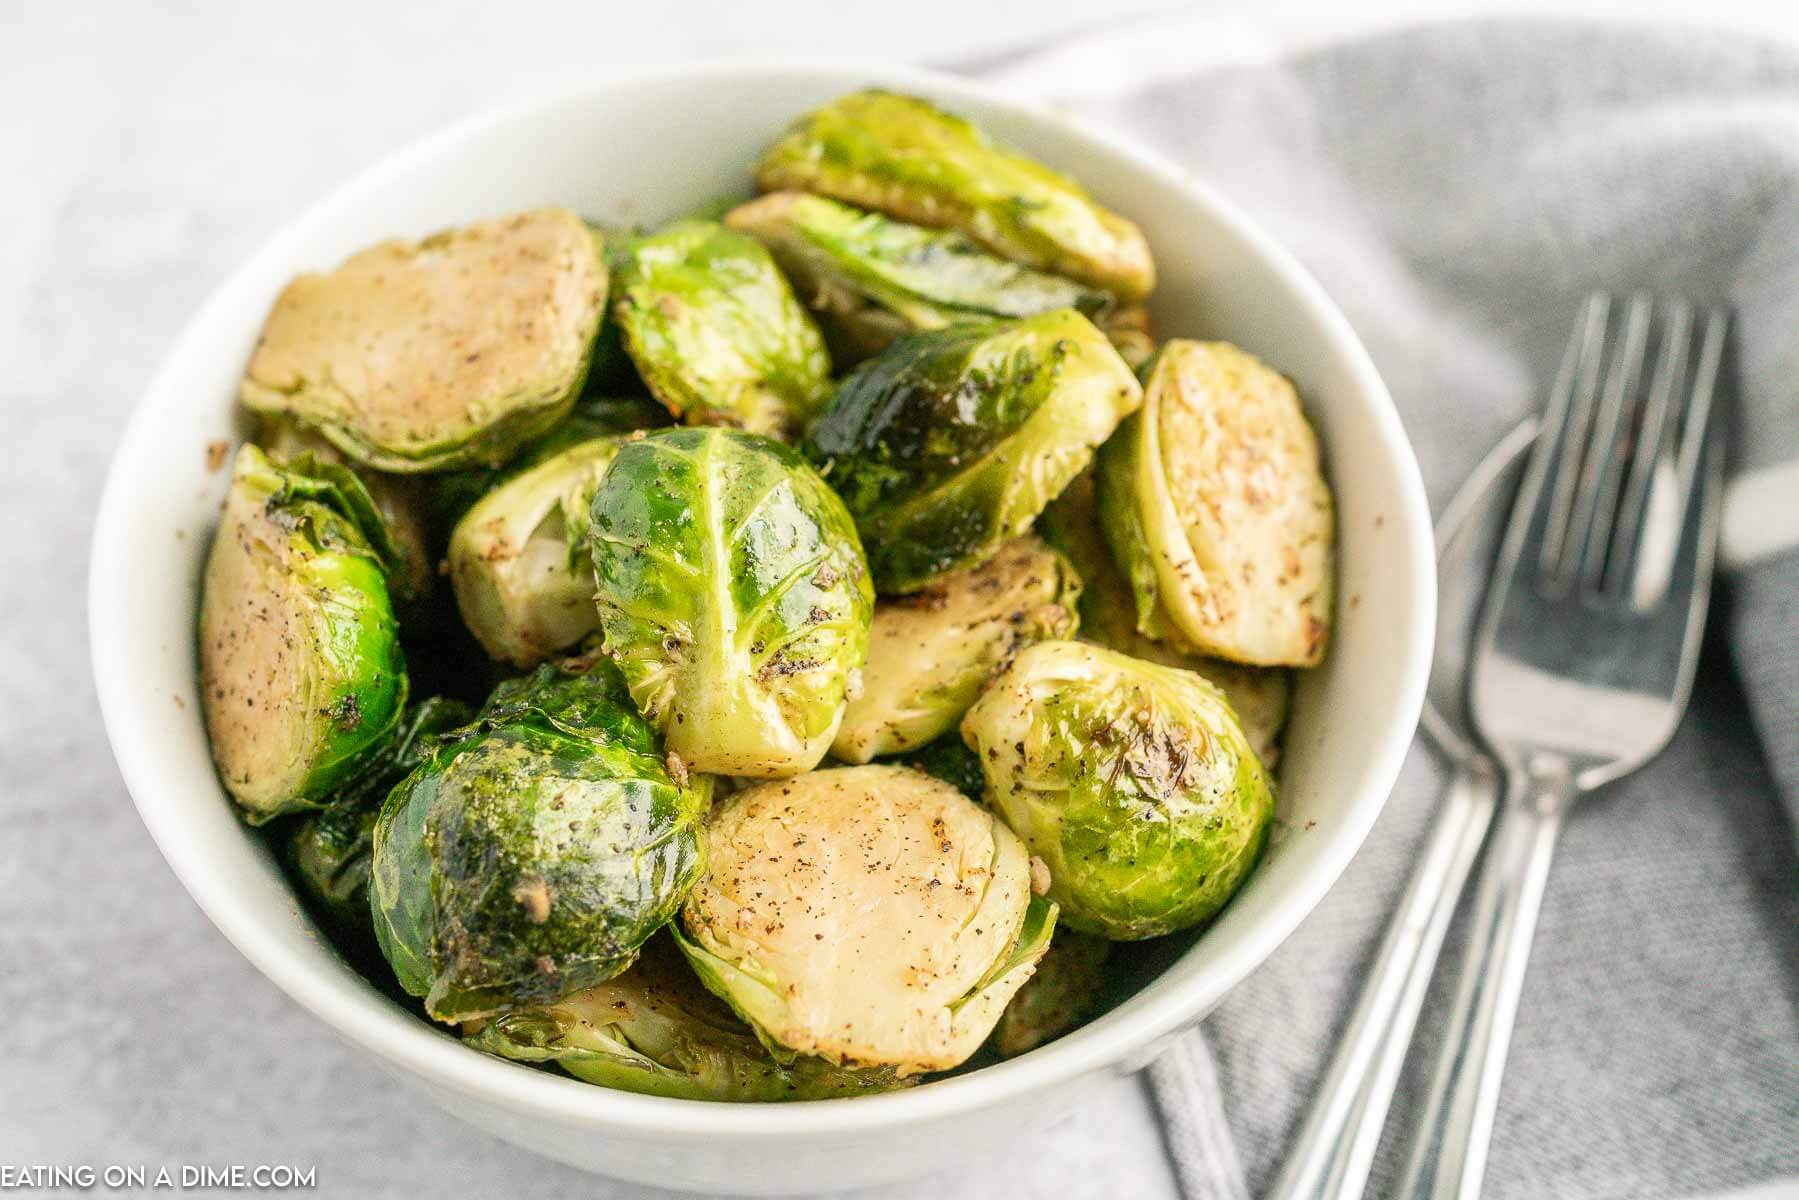 A bowl of Roasted Brussel Sprouts